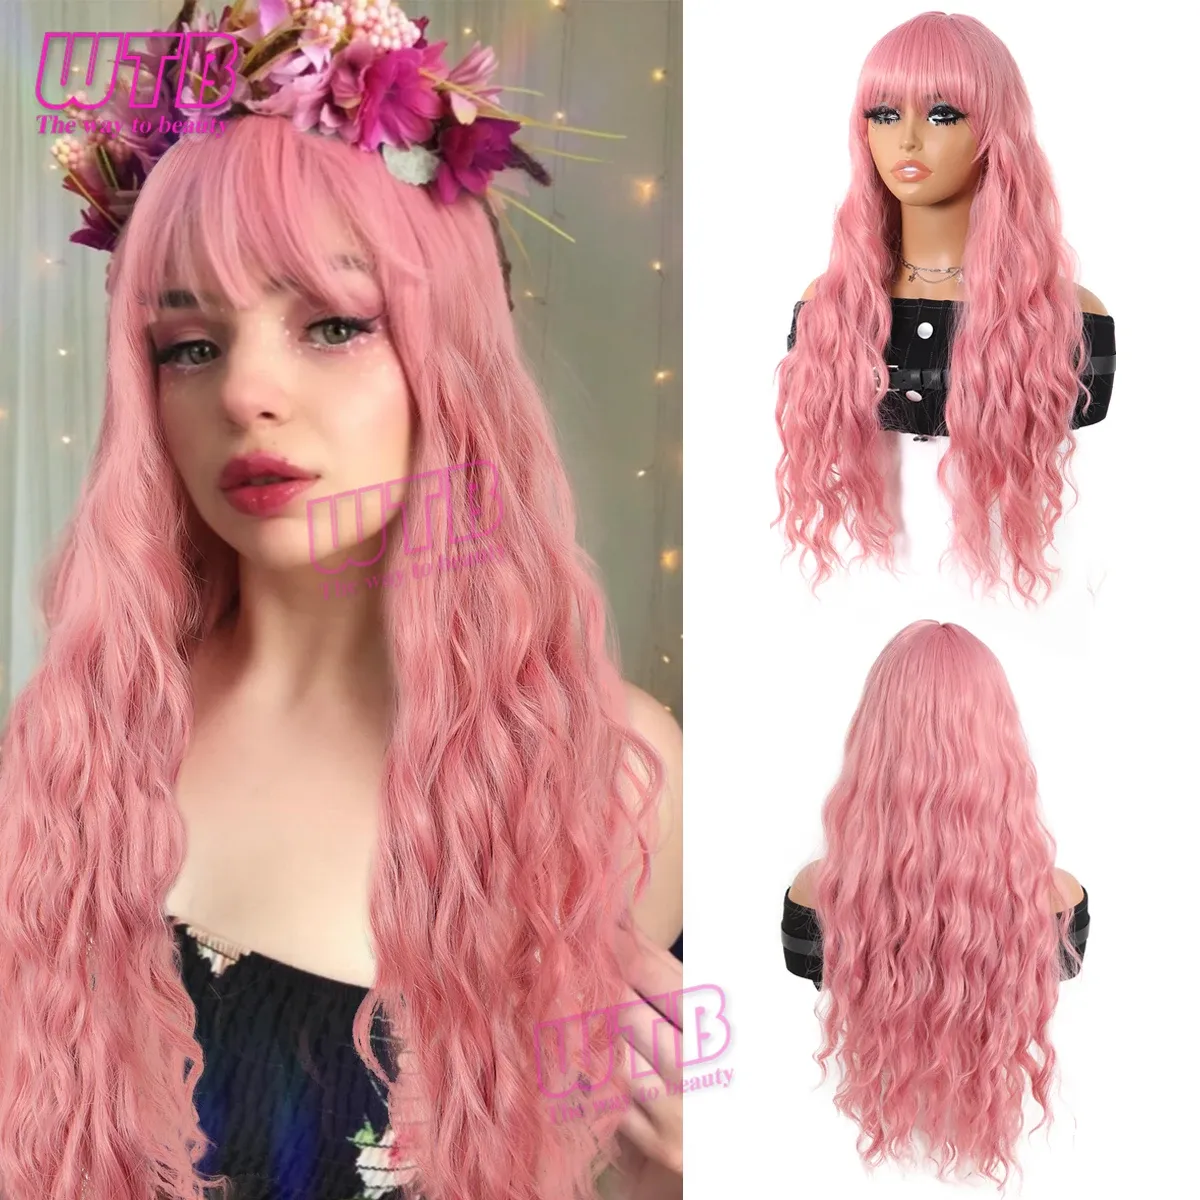 Wigs WTB Synthetic Lolita Long Water Wave Pink Wigs with Bangs for Women Heat Resistant Fashion Cosplsy Party Halloween Wigs